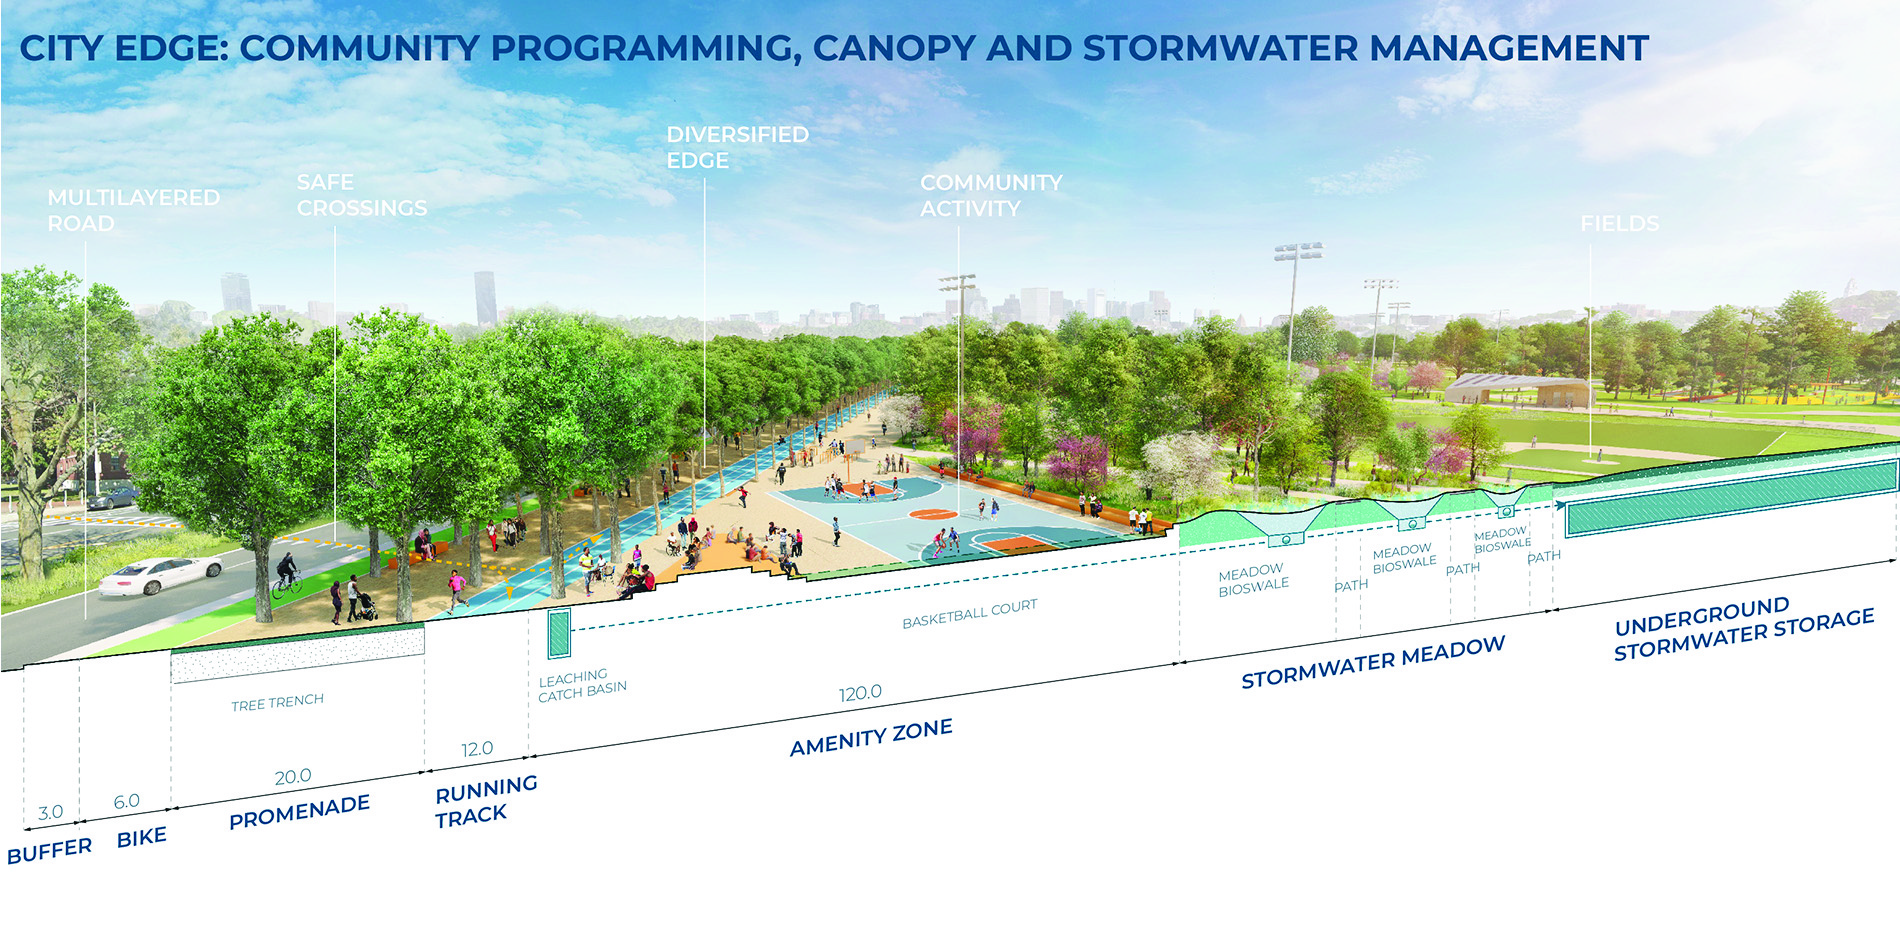 City Edge: Community Programming, Canopy and Stormwater Management